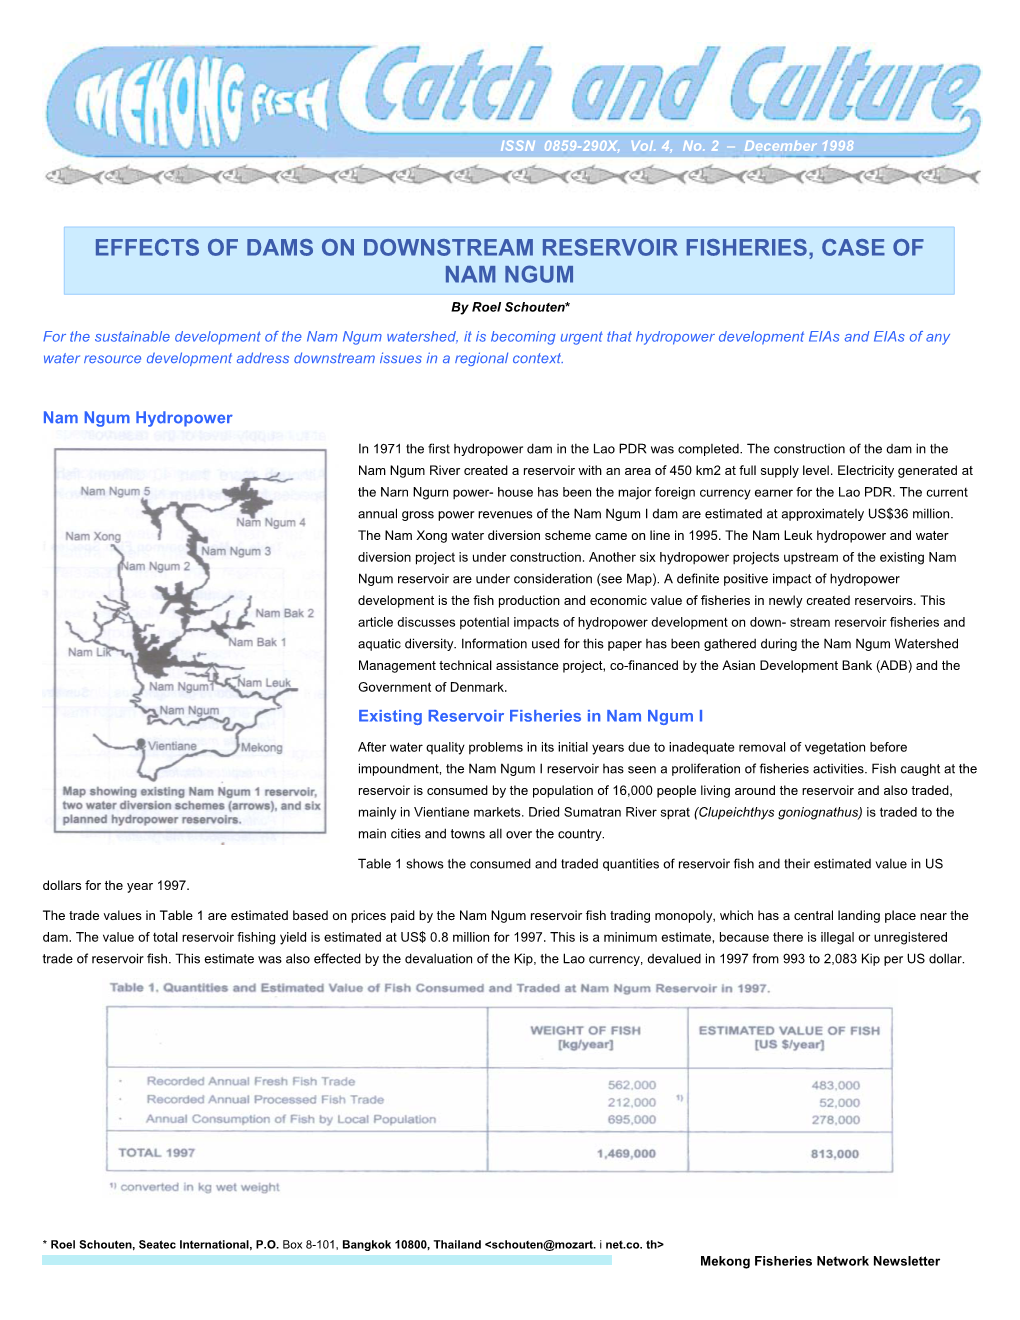 Effects of Dams on Downstream Reservoir Fisheries, Case of Nam Ngum